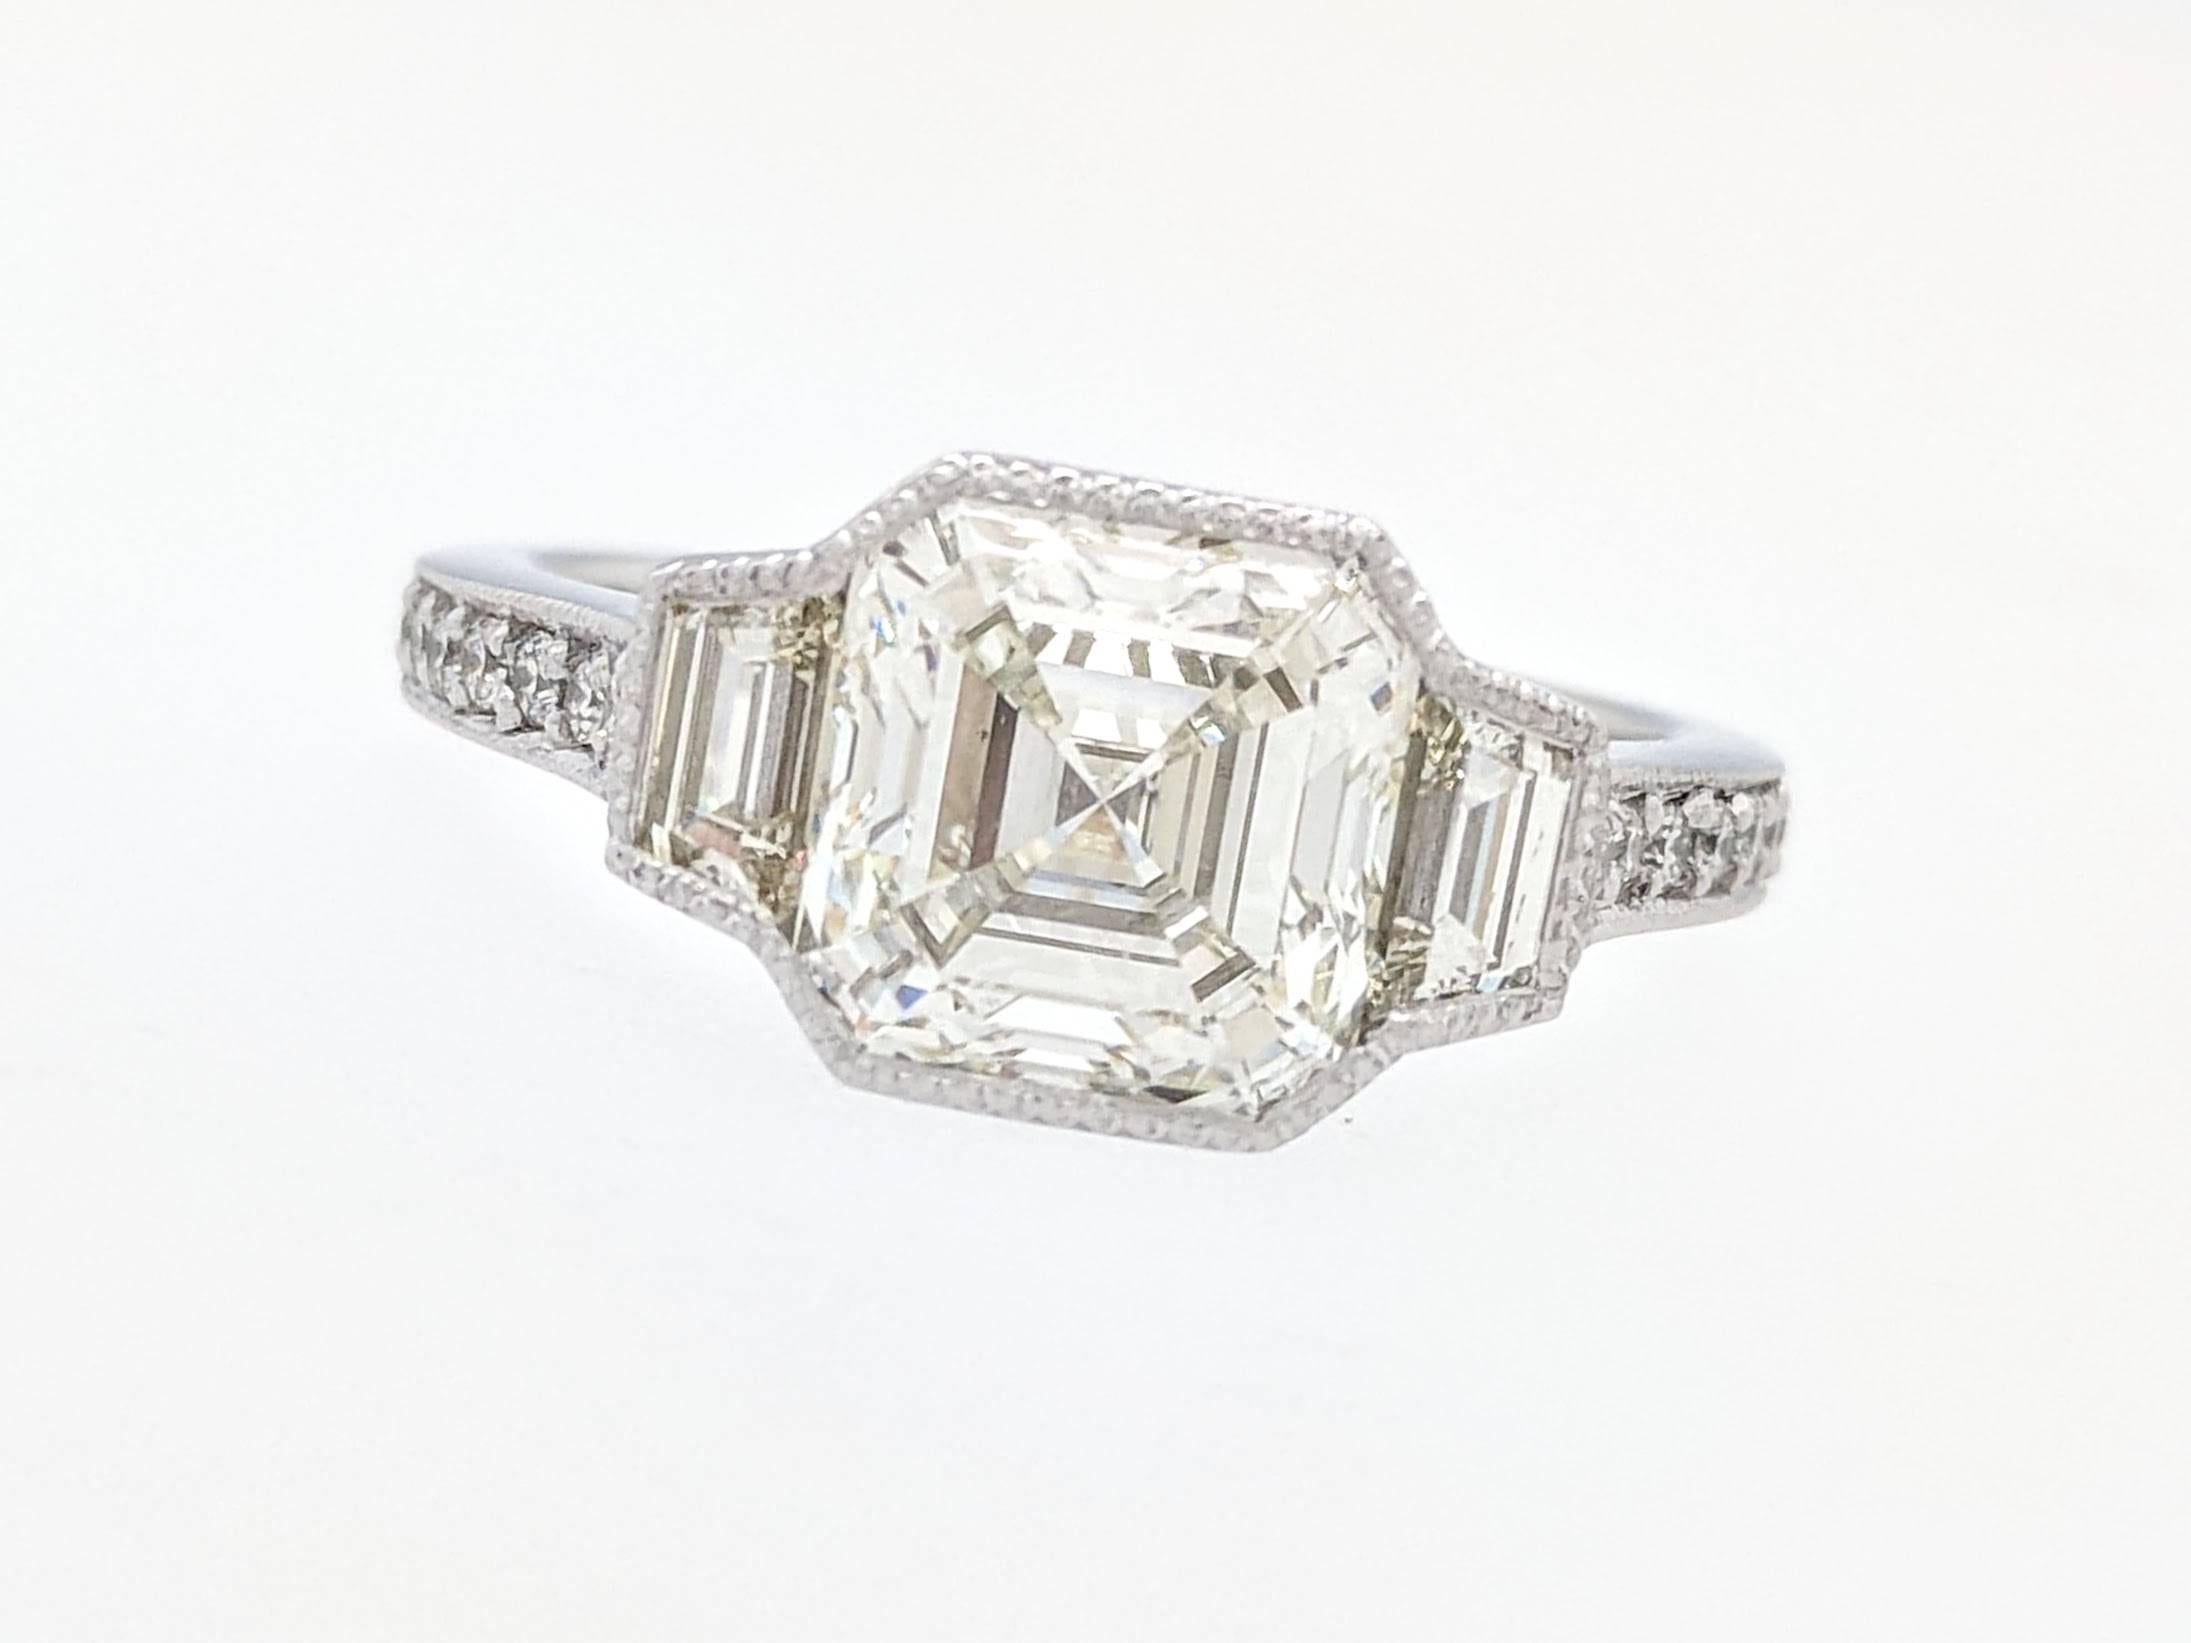  2.51ct. Squared Emerald Cut Natural Diamond Engagement Ring GIA Certified SI1/K

You are viewing a Stunning 2.51ct. natural square emerald cut diamond. This diamond is certified by GIA (Gemological Institute of America) and has been graded as SI1